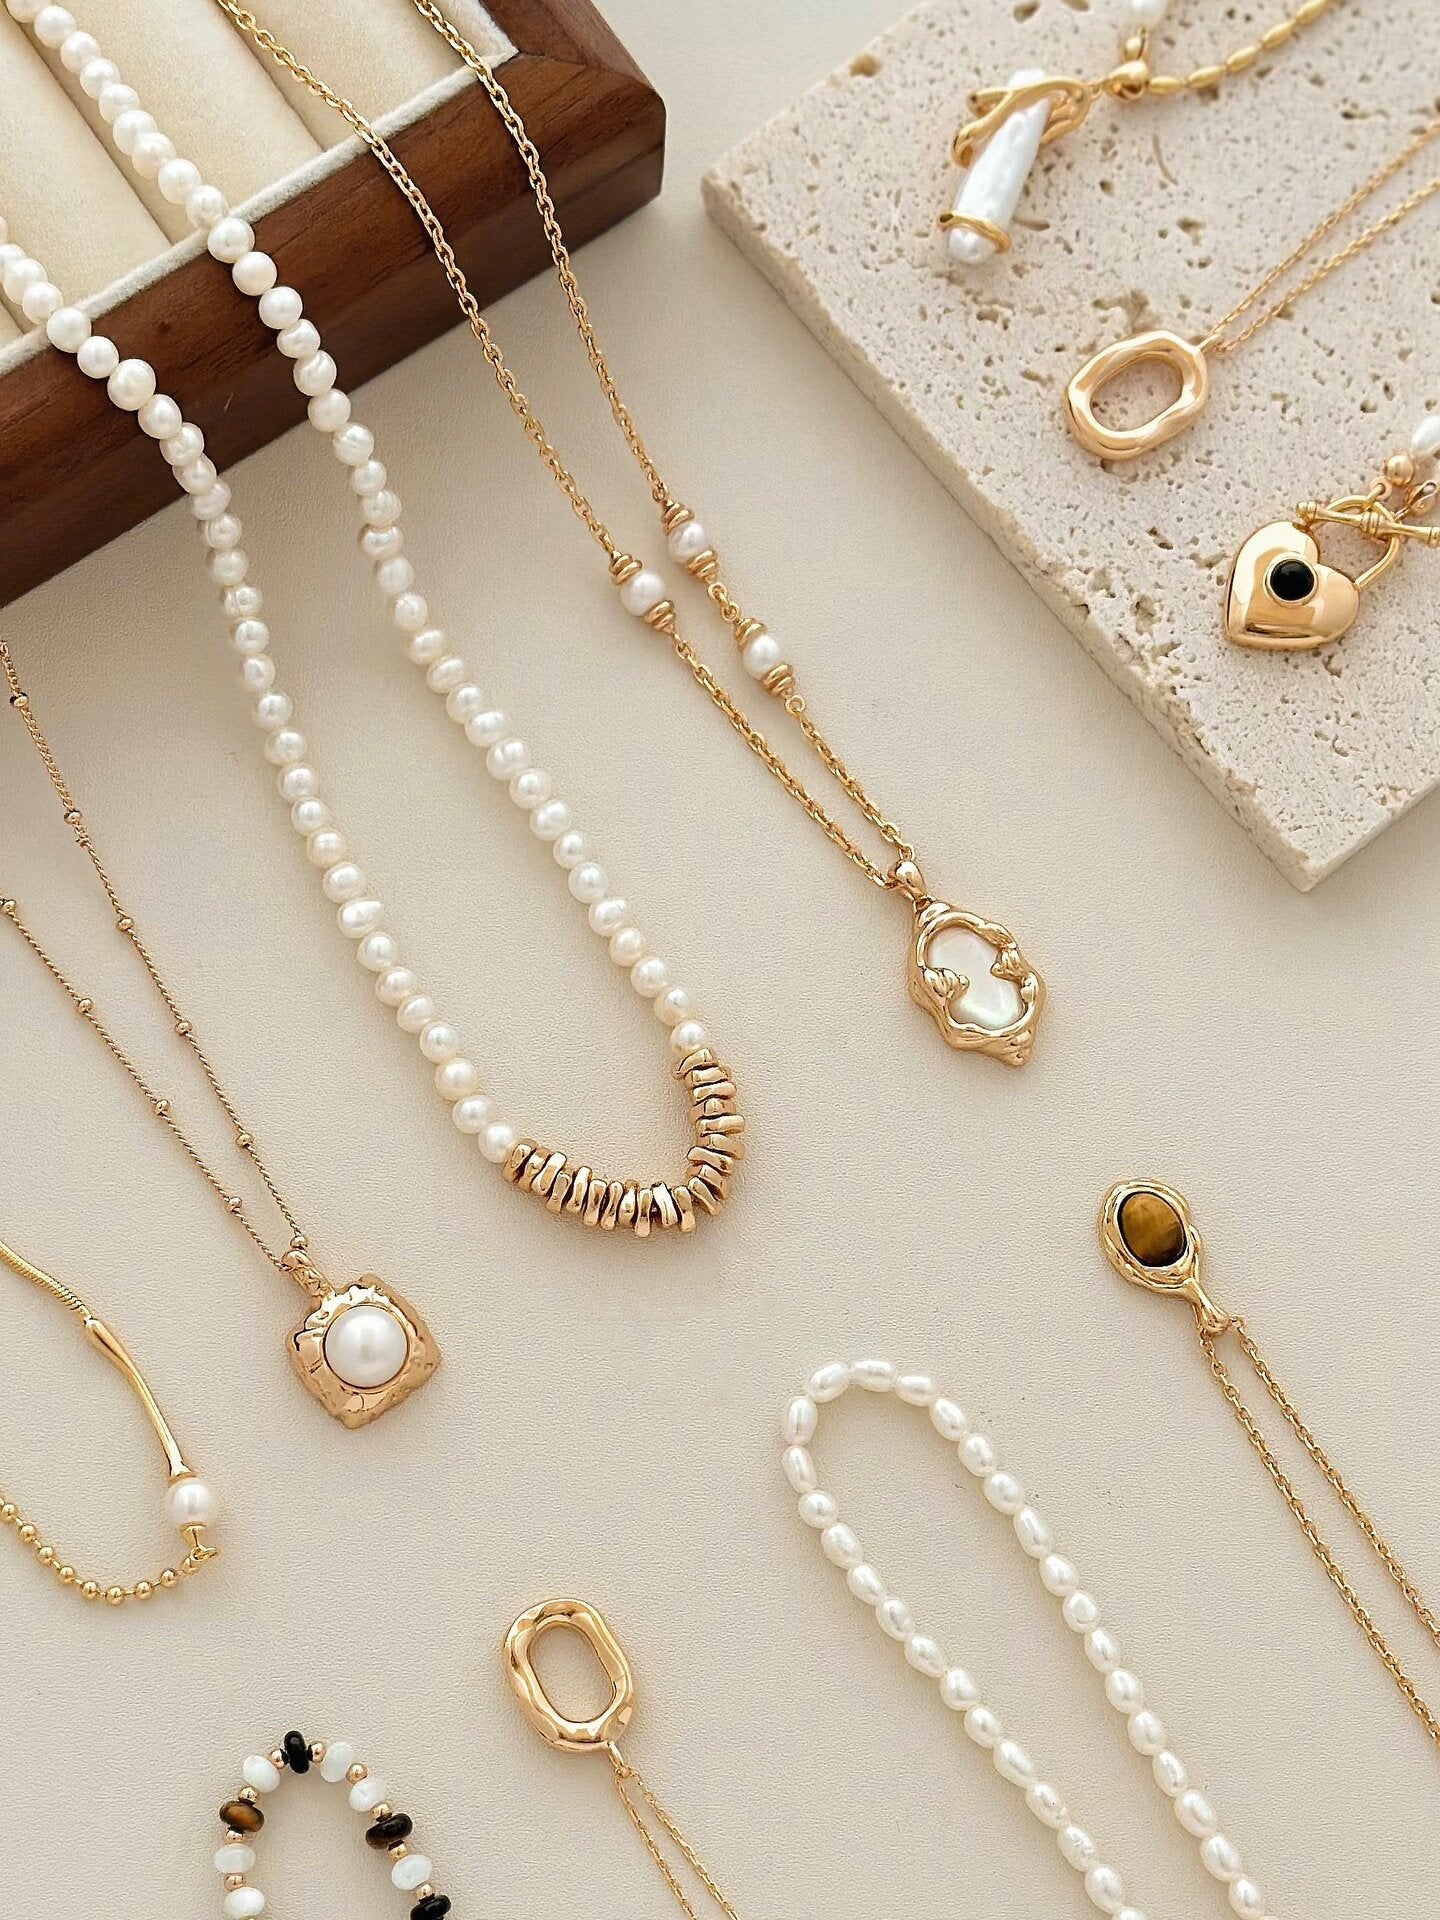 Gold jewelry | Silver jewelry | Gold necklace | Pearl necklace | Pearl jewelry